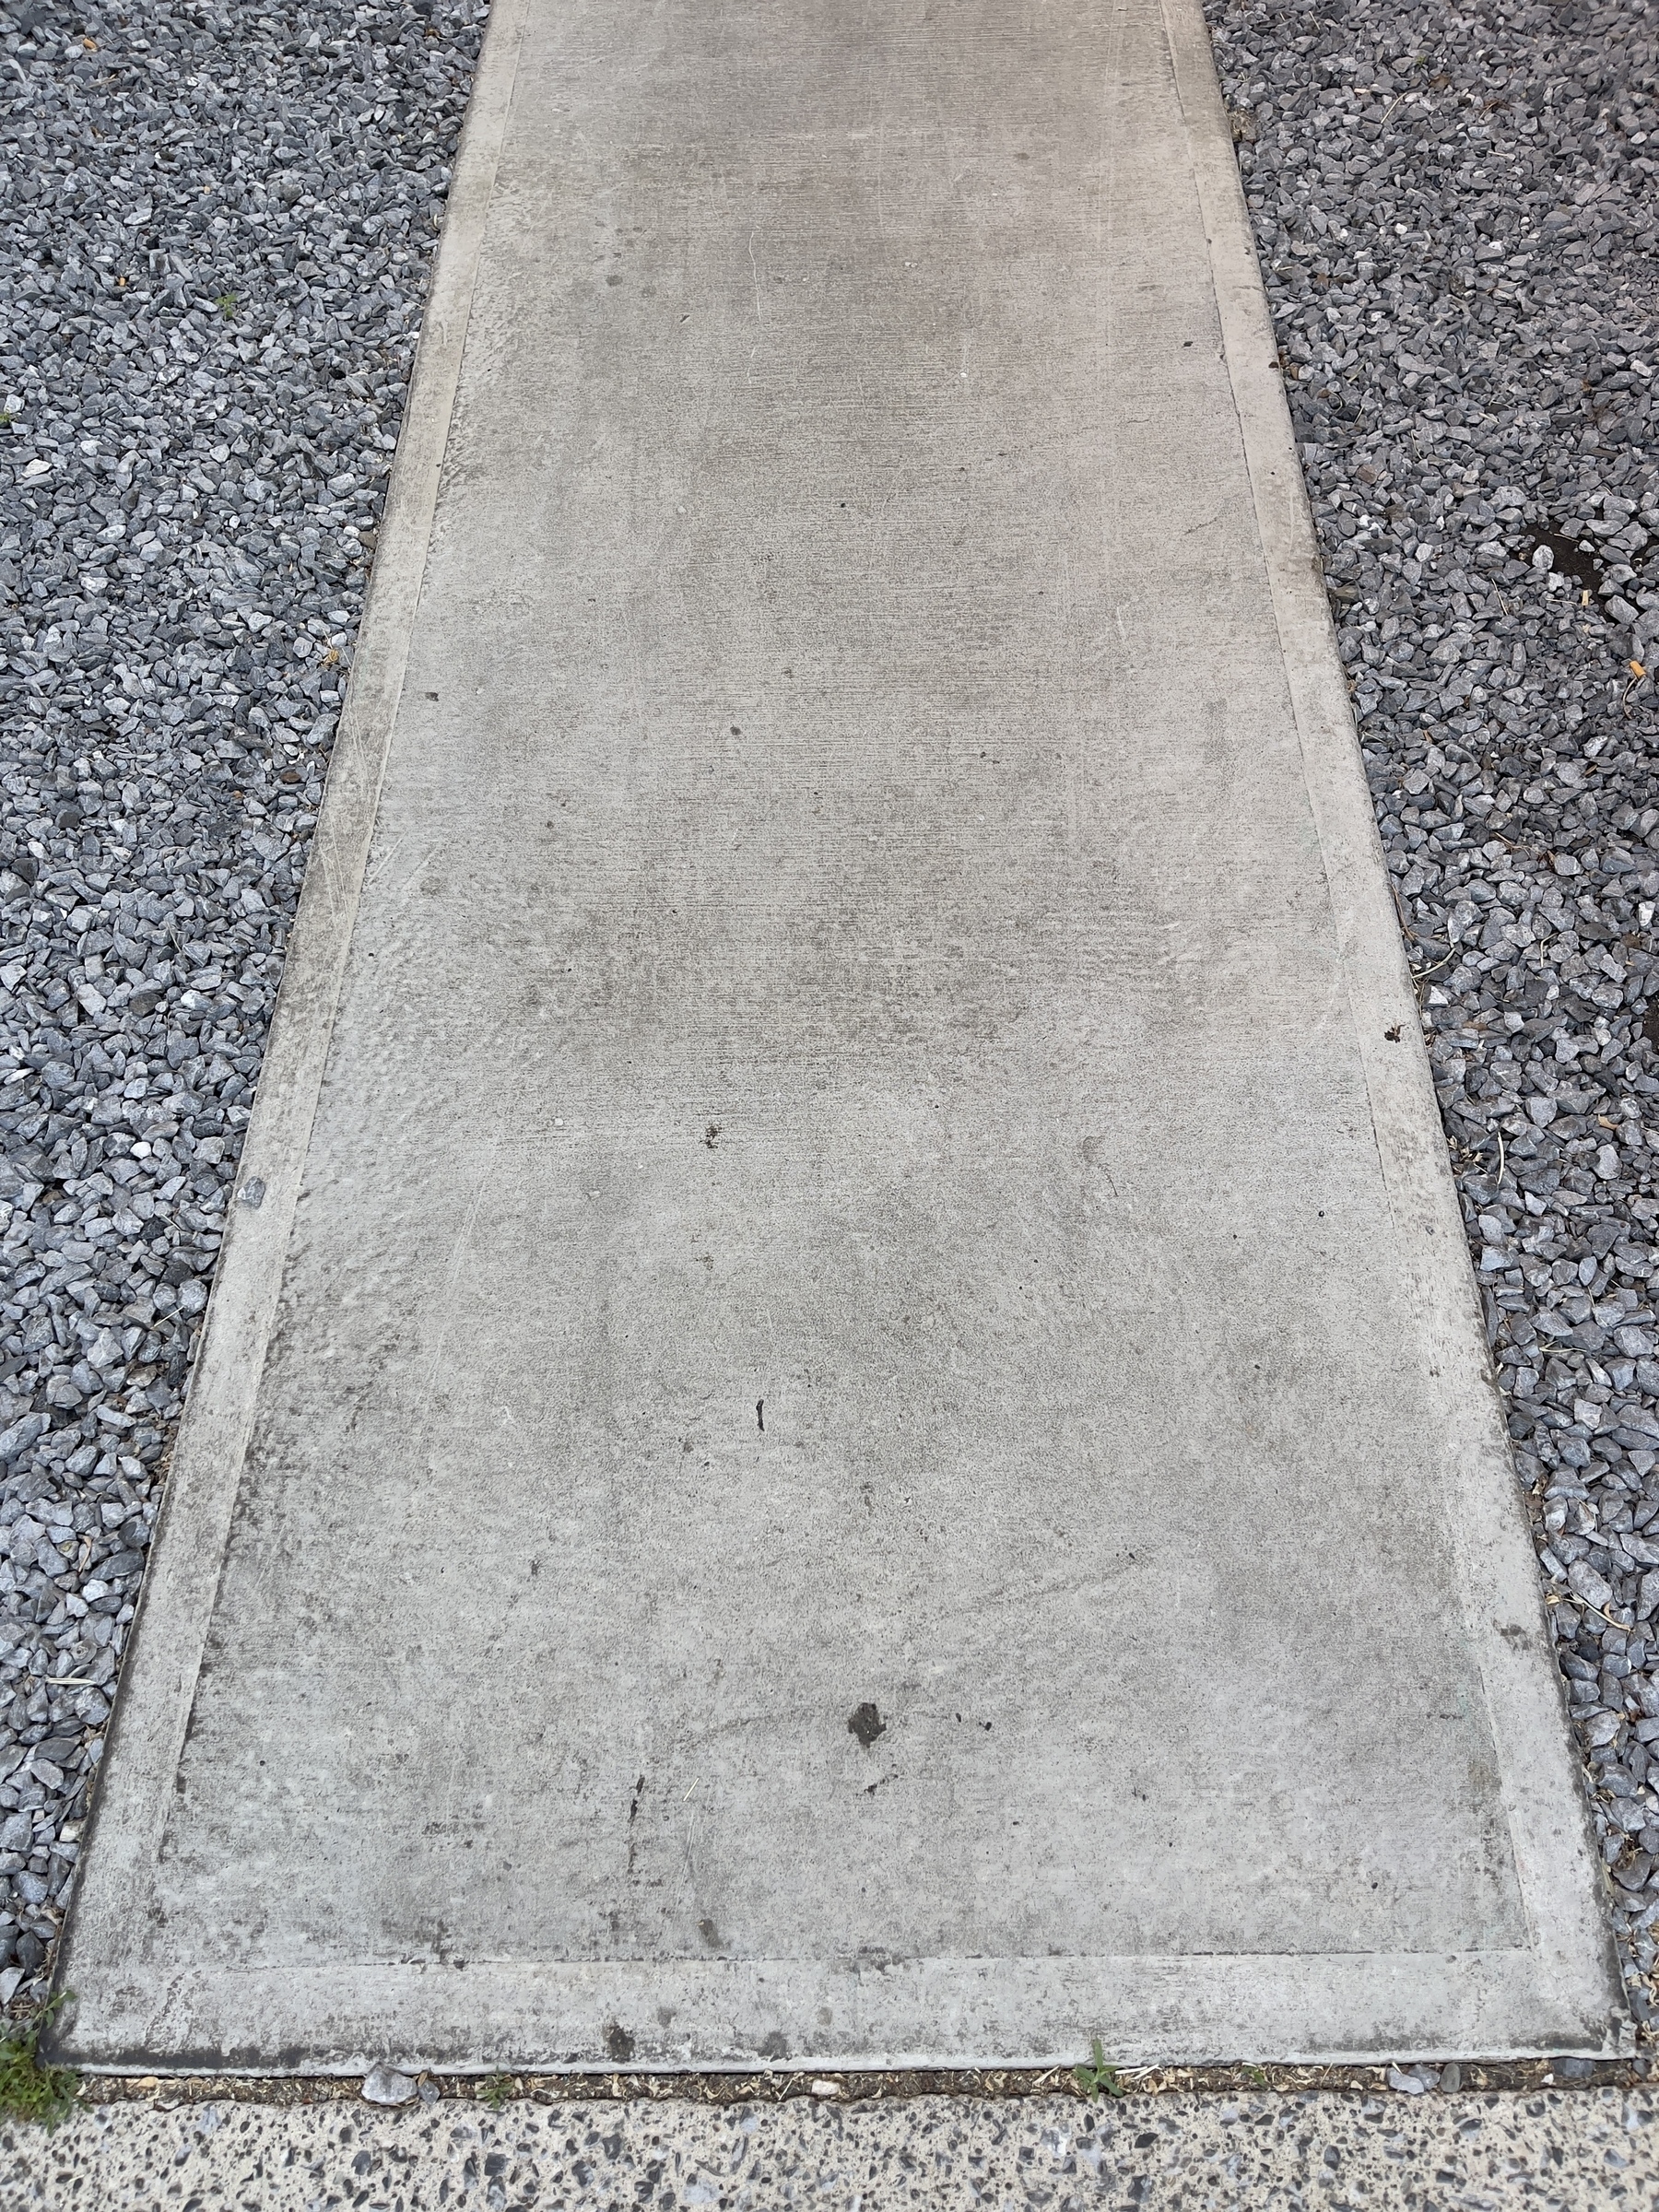 Concrete sidewalk with gravel on the left and right.